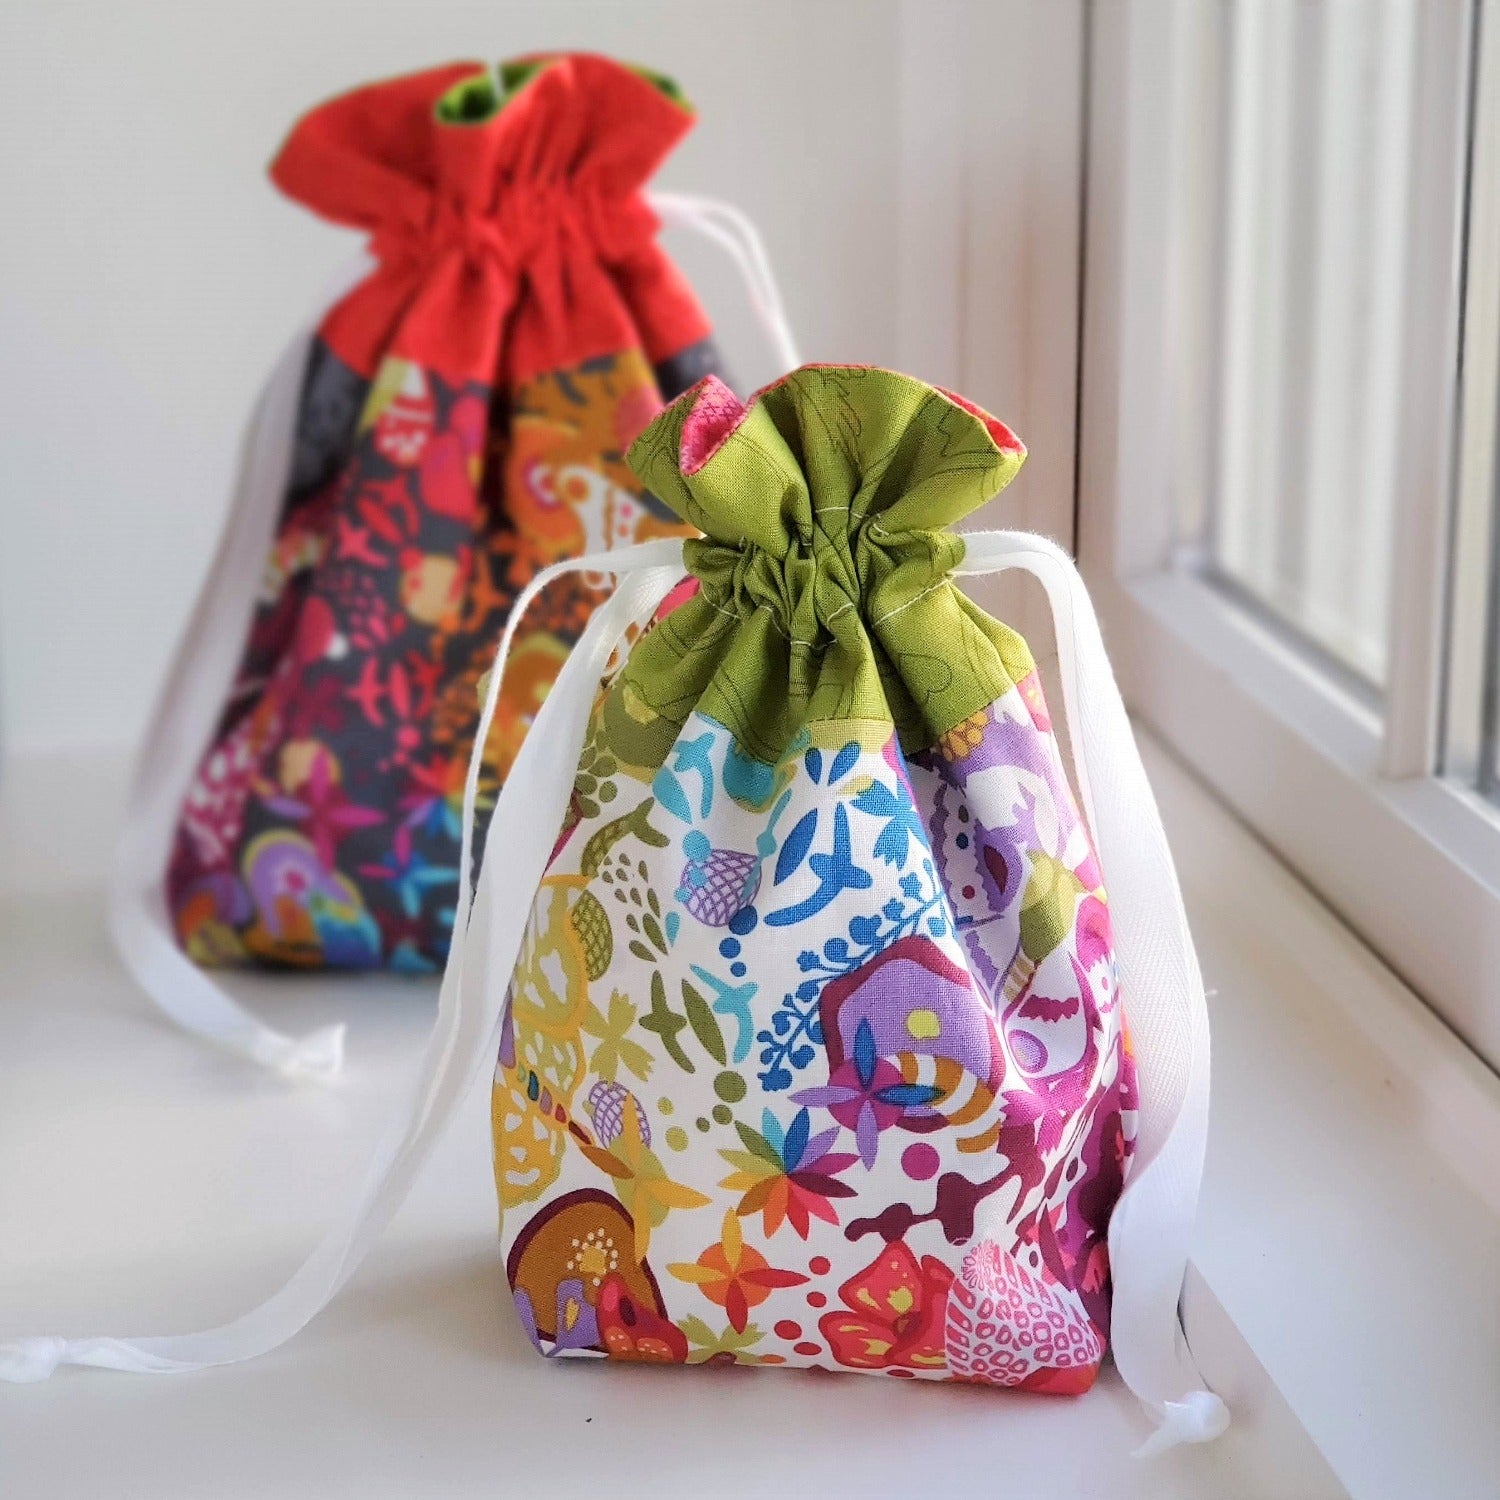 Drawstring Fabric Gift Bag Tutorial - Positively Splendid {Crafts, Sewing,  Recipes and Home Decor} | Christmas sewing, Fabric gift bags, Easy sewing  projects